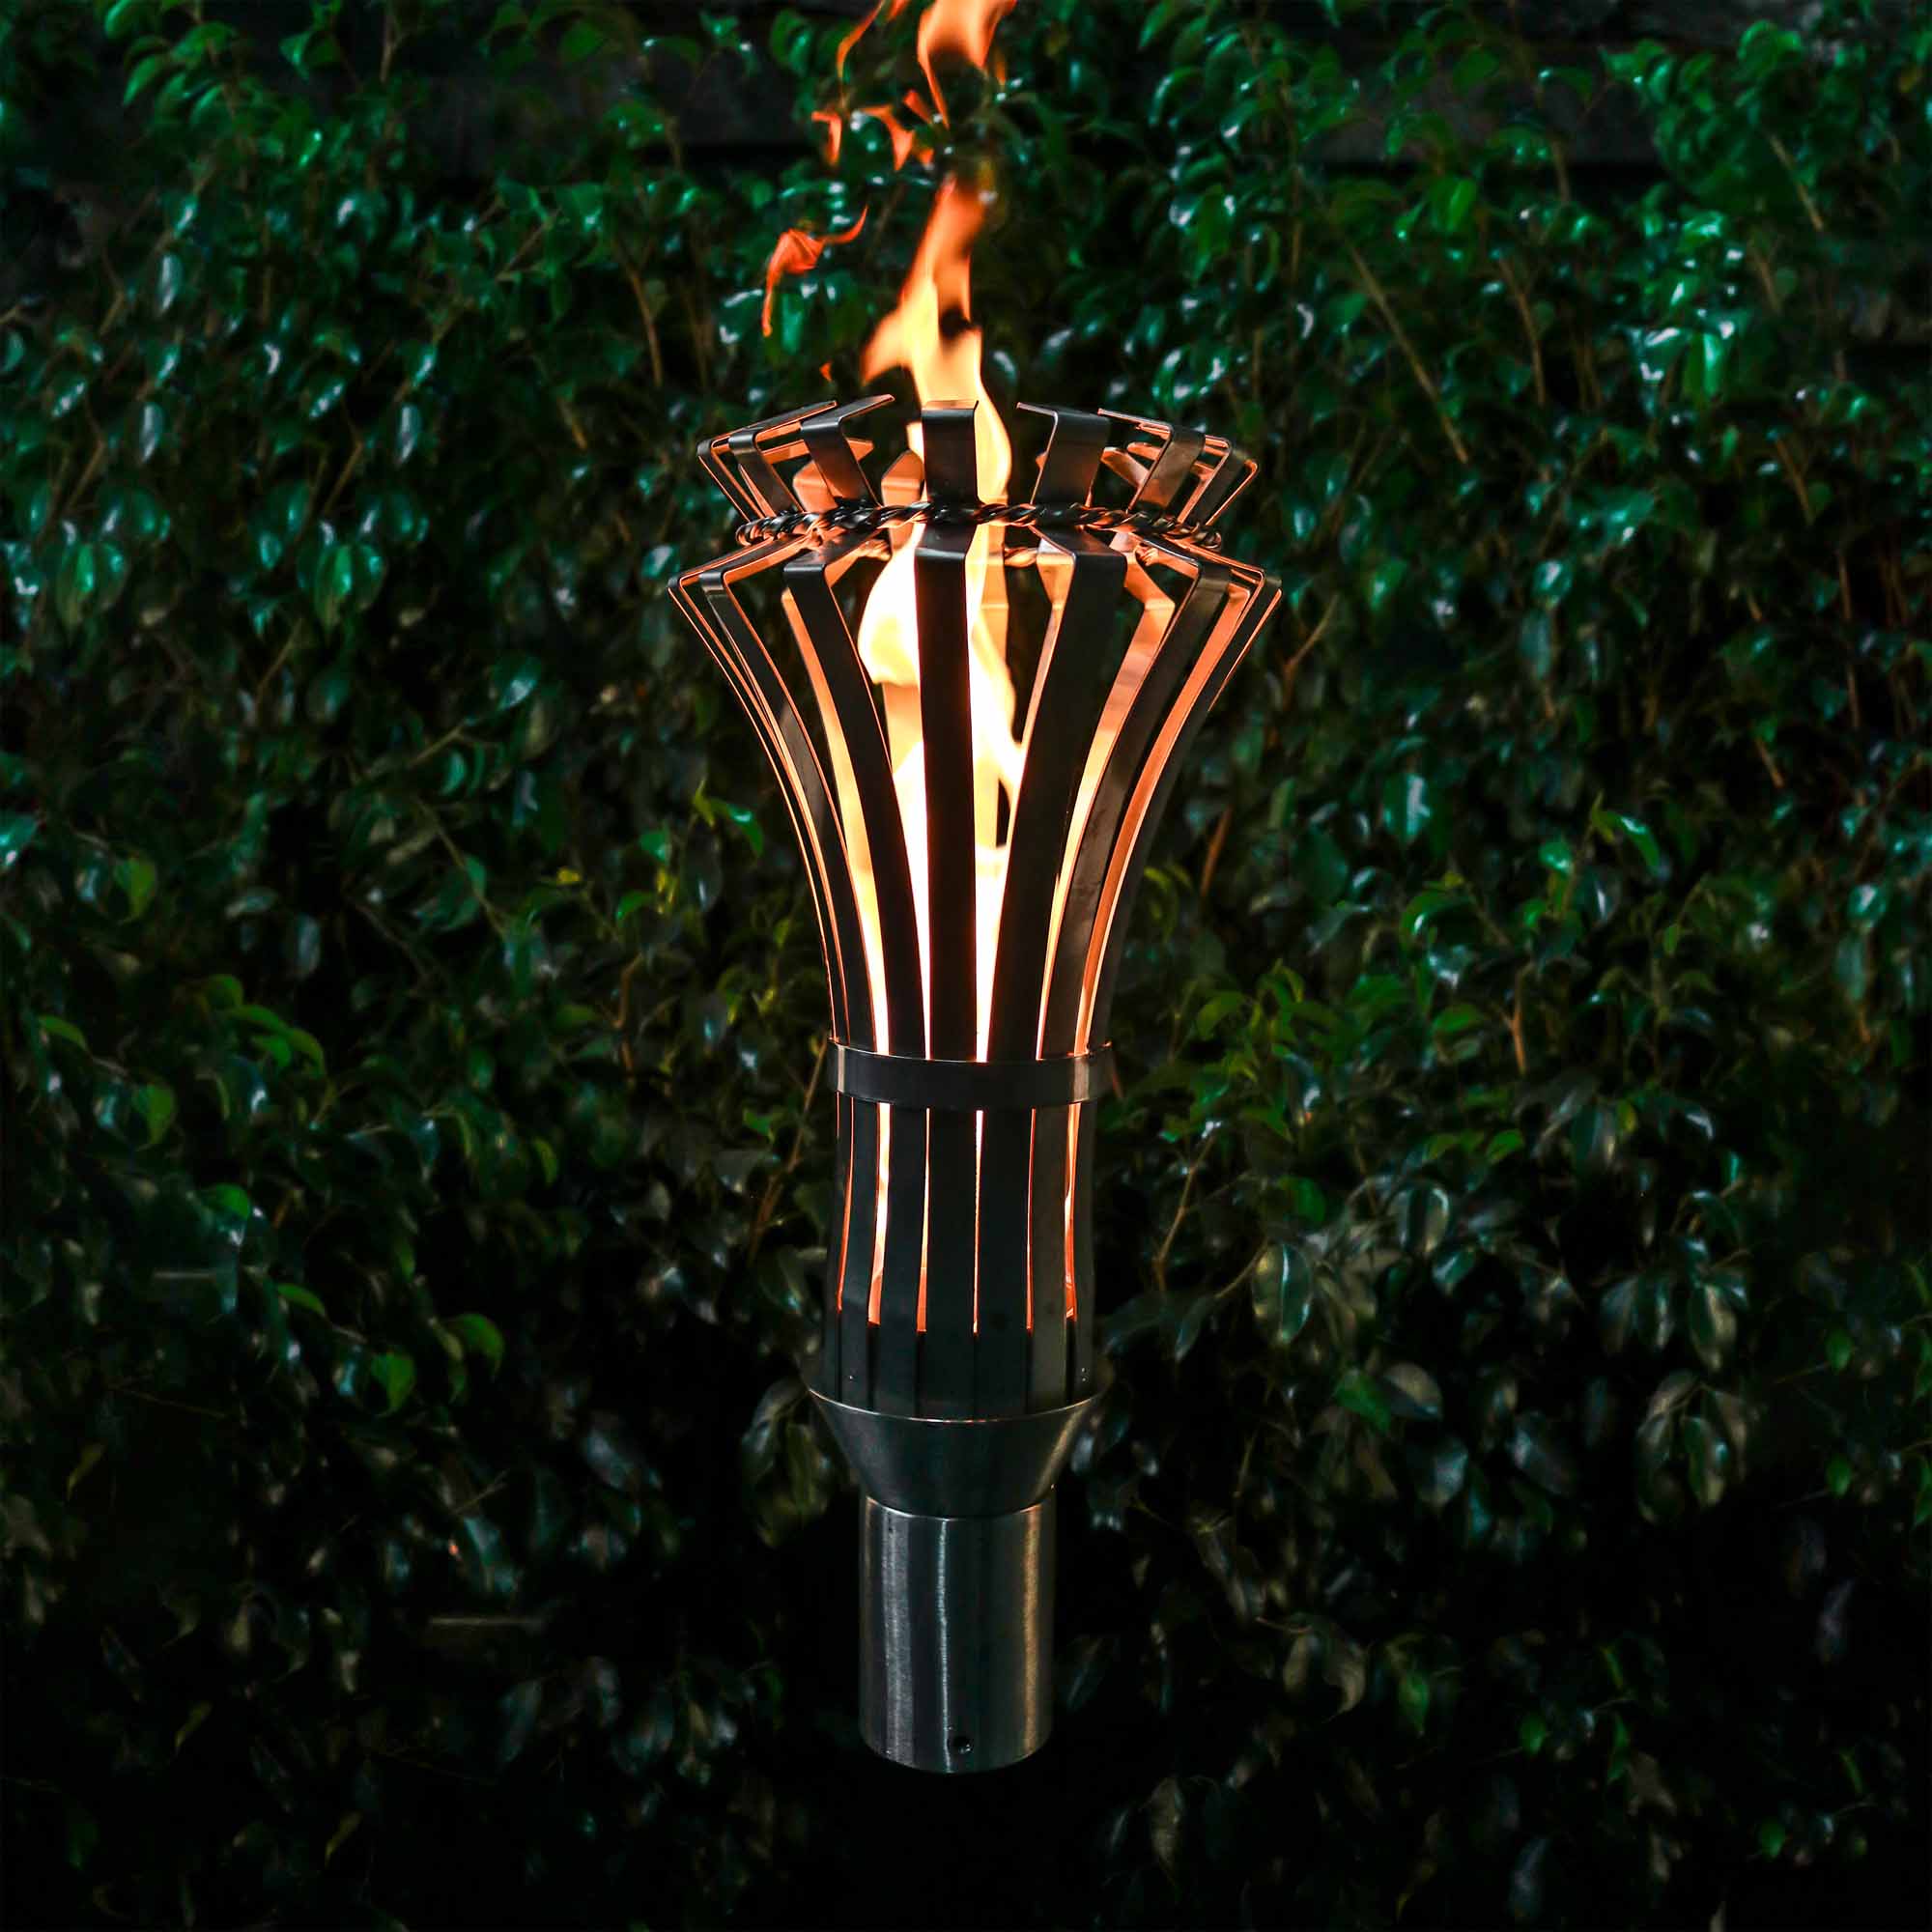 The Outdoor Plus 14" Gothic Stainless Steel Fire Torch